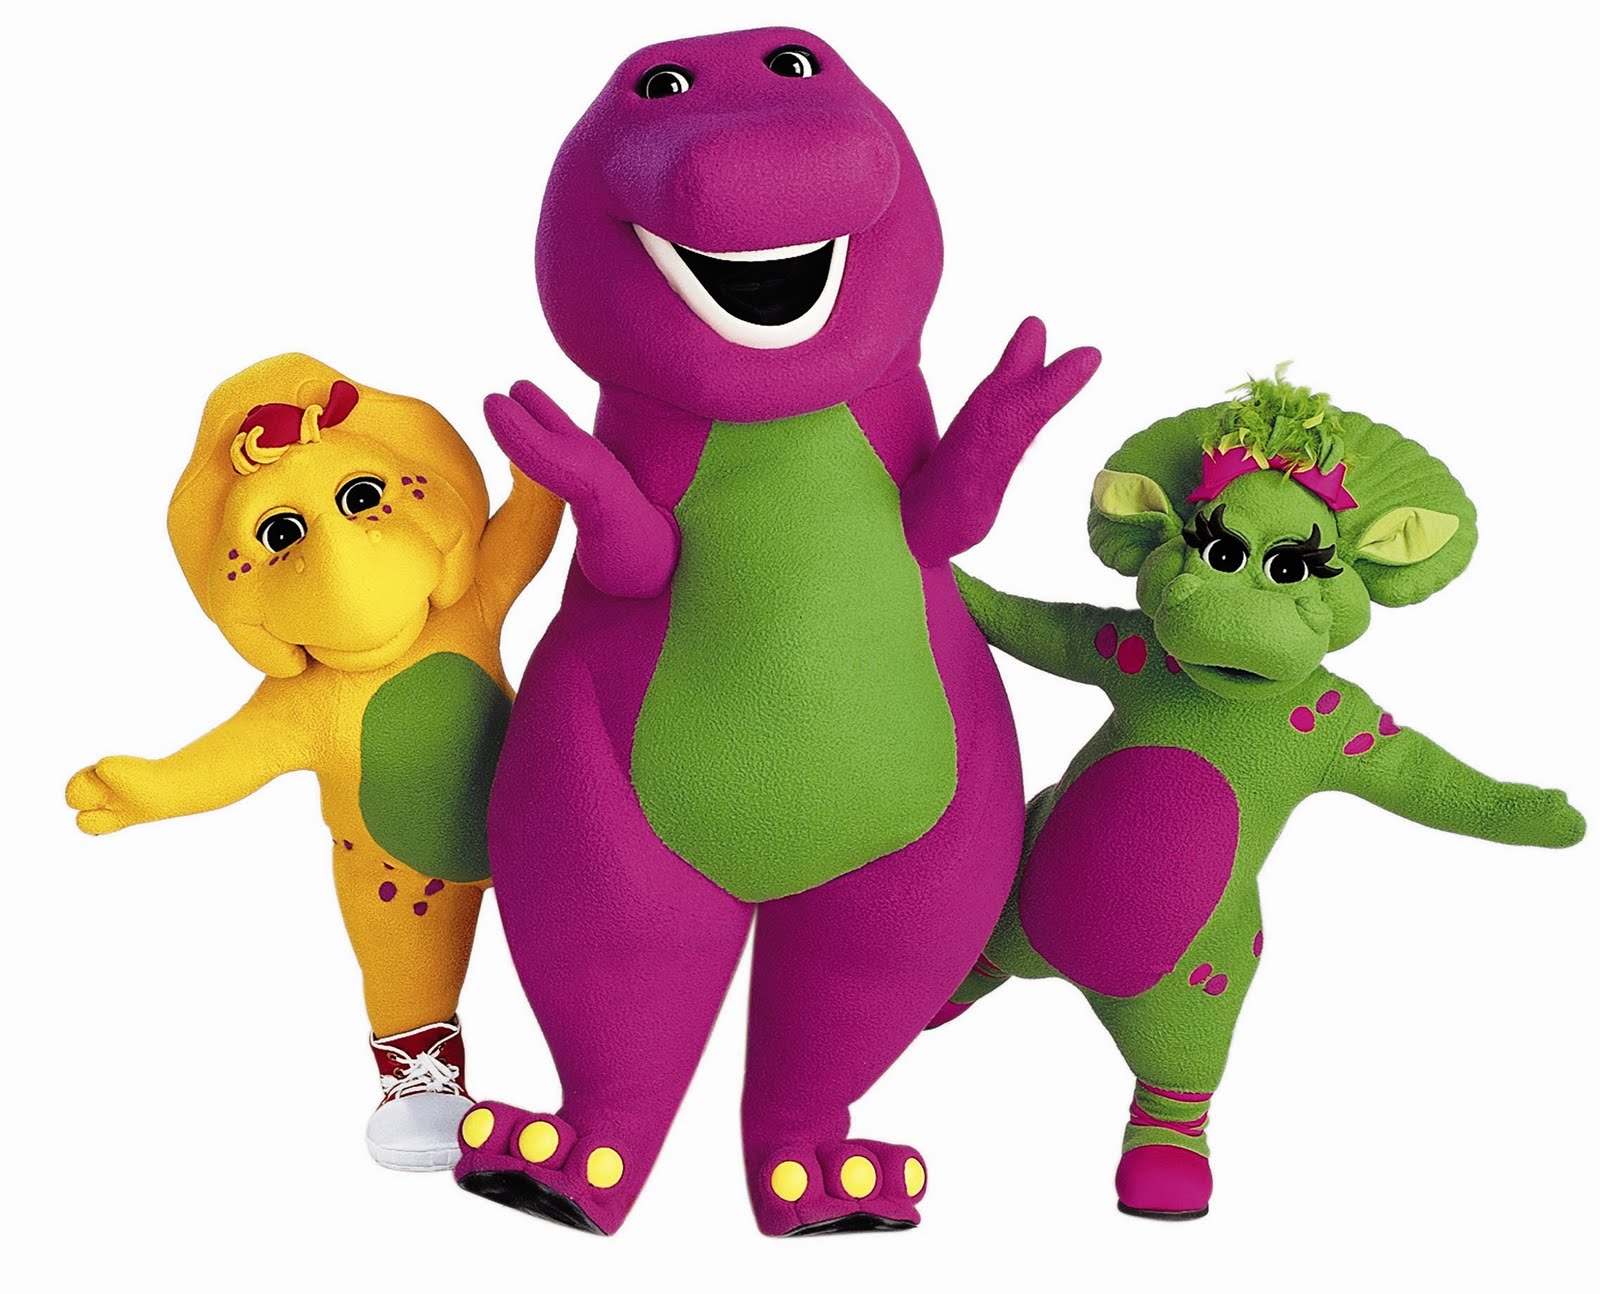 barney and friends picture barney and friends wallpaper